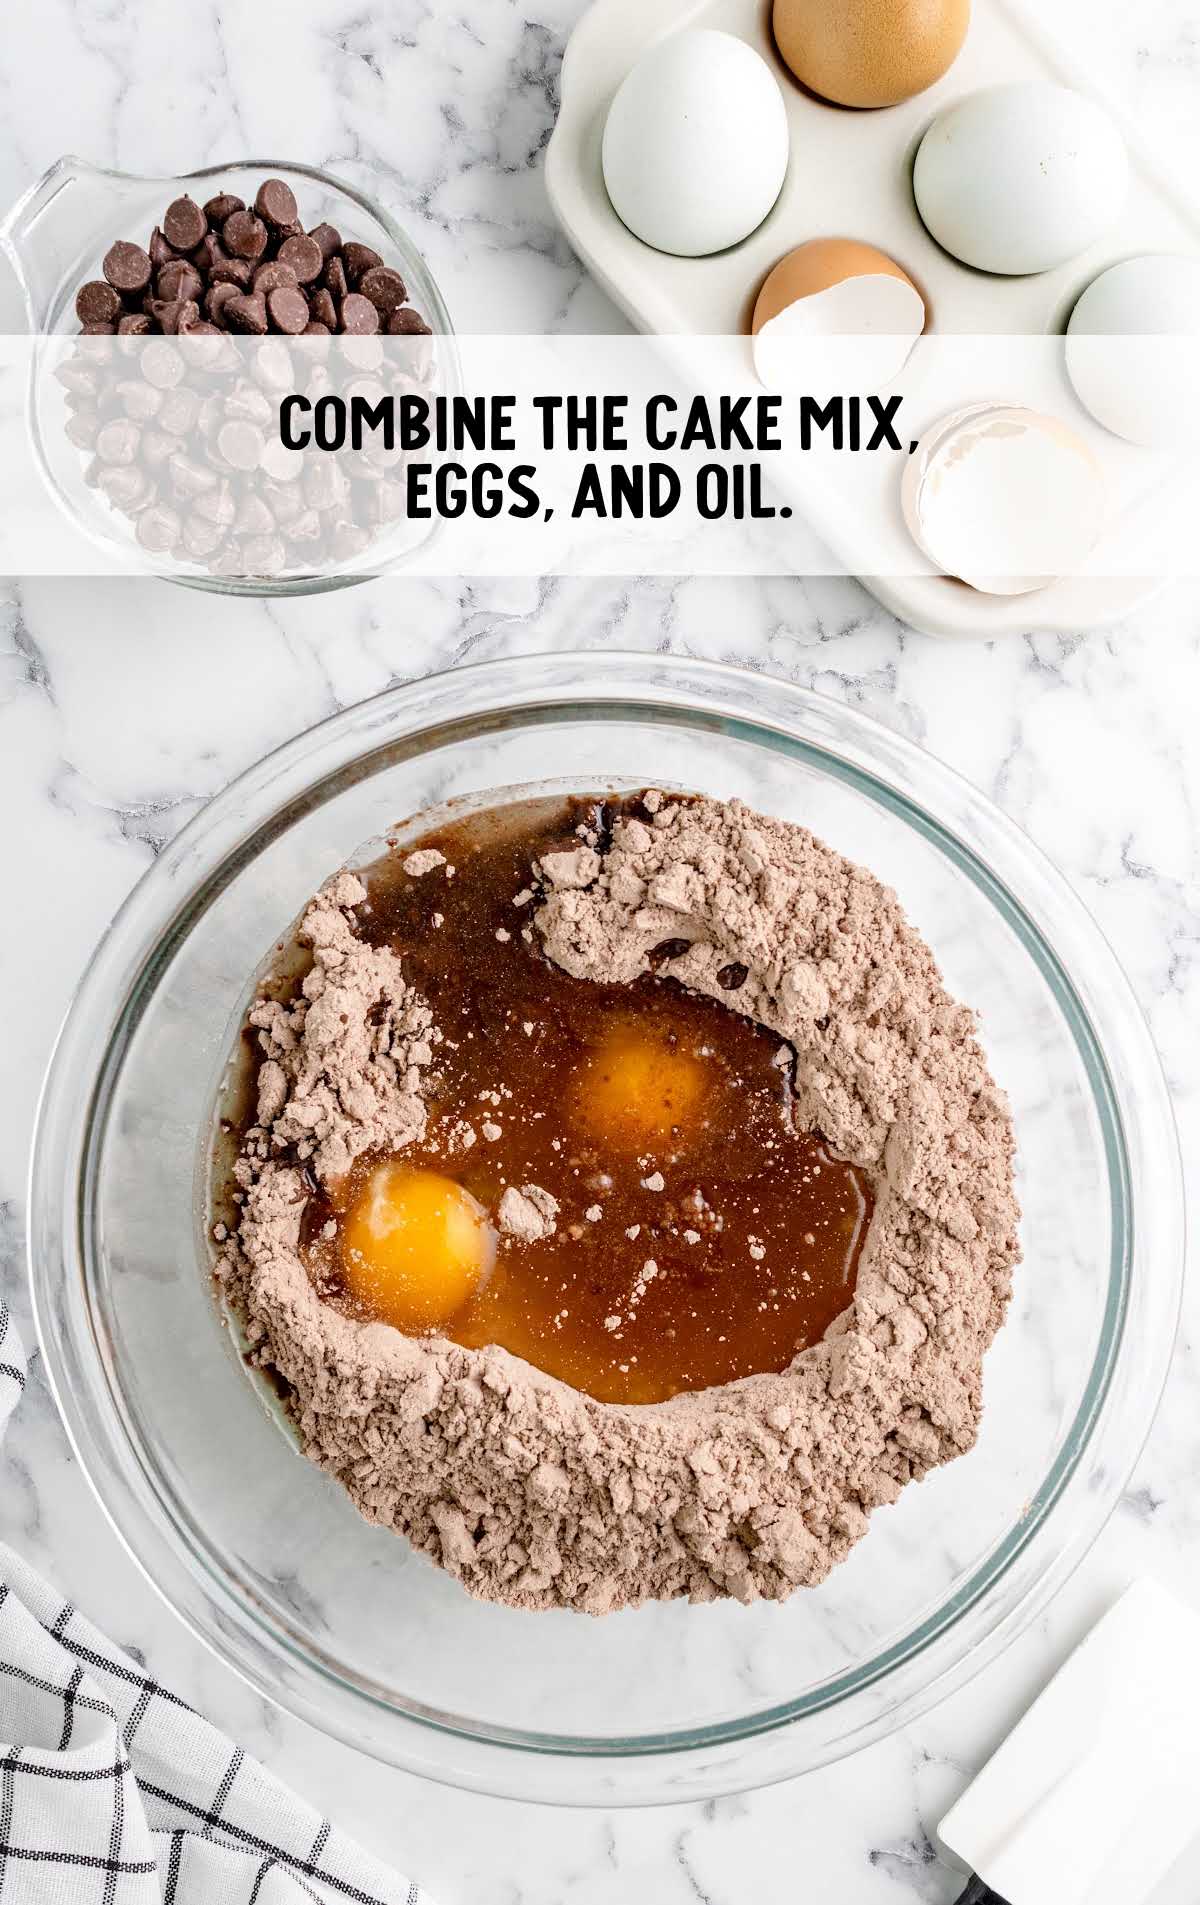 cake mix, eggs, and oil combined